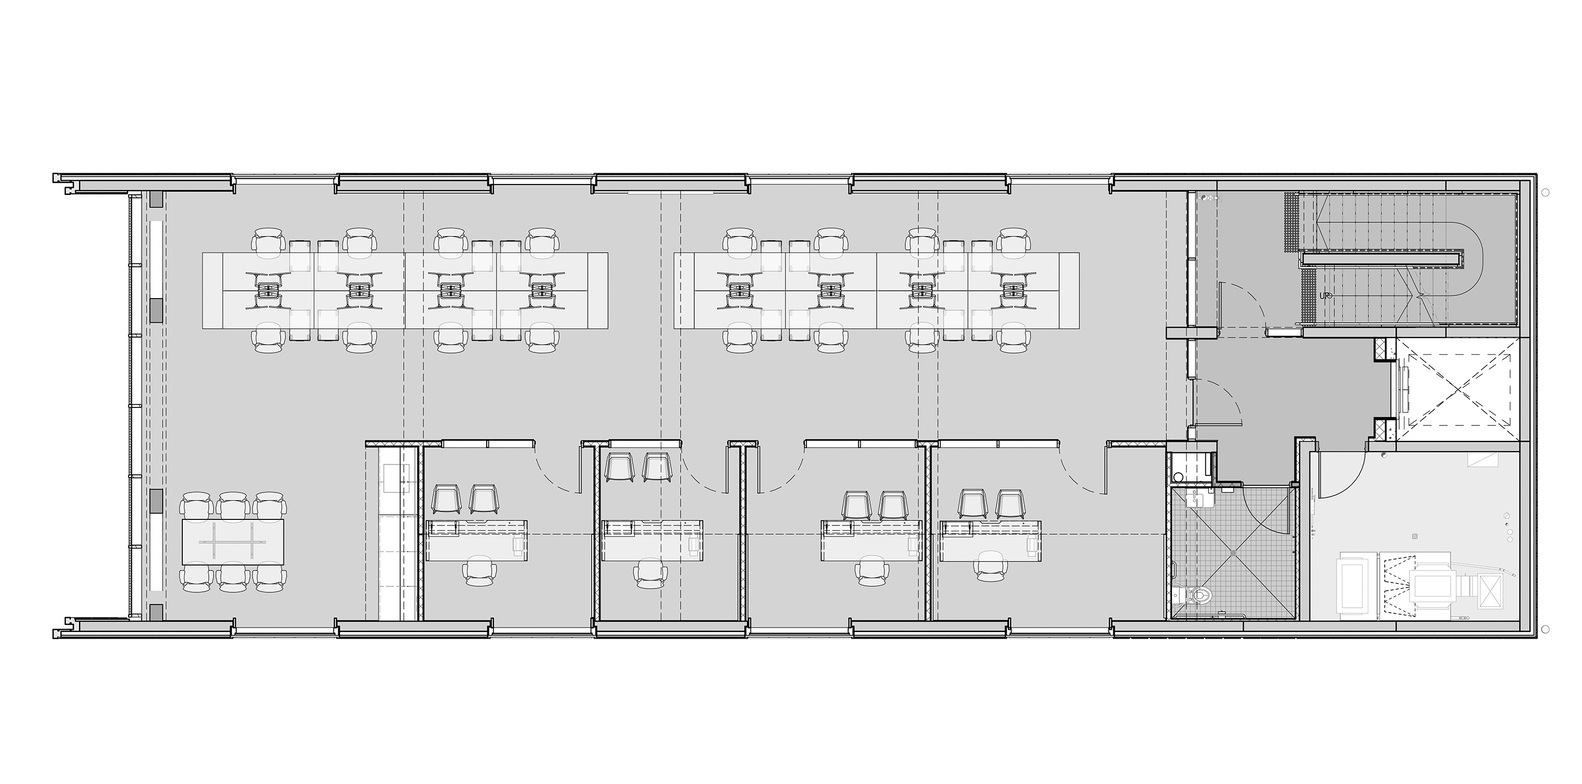 Typical Floor Plan NIOA Timber Tower, Souce by KIRK